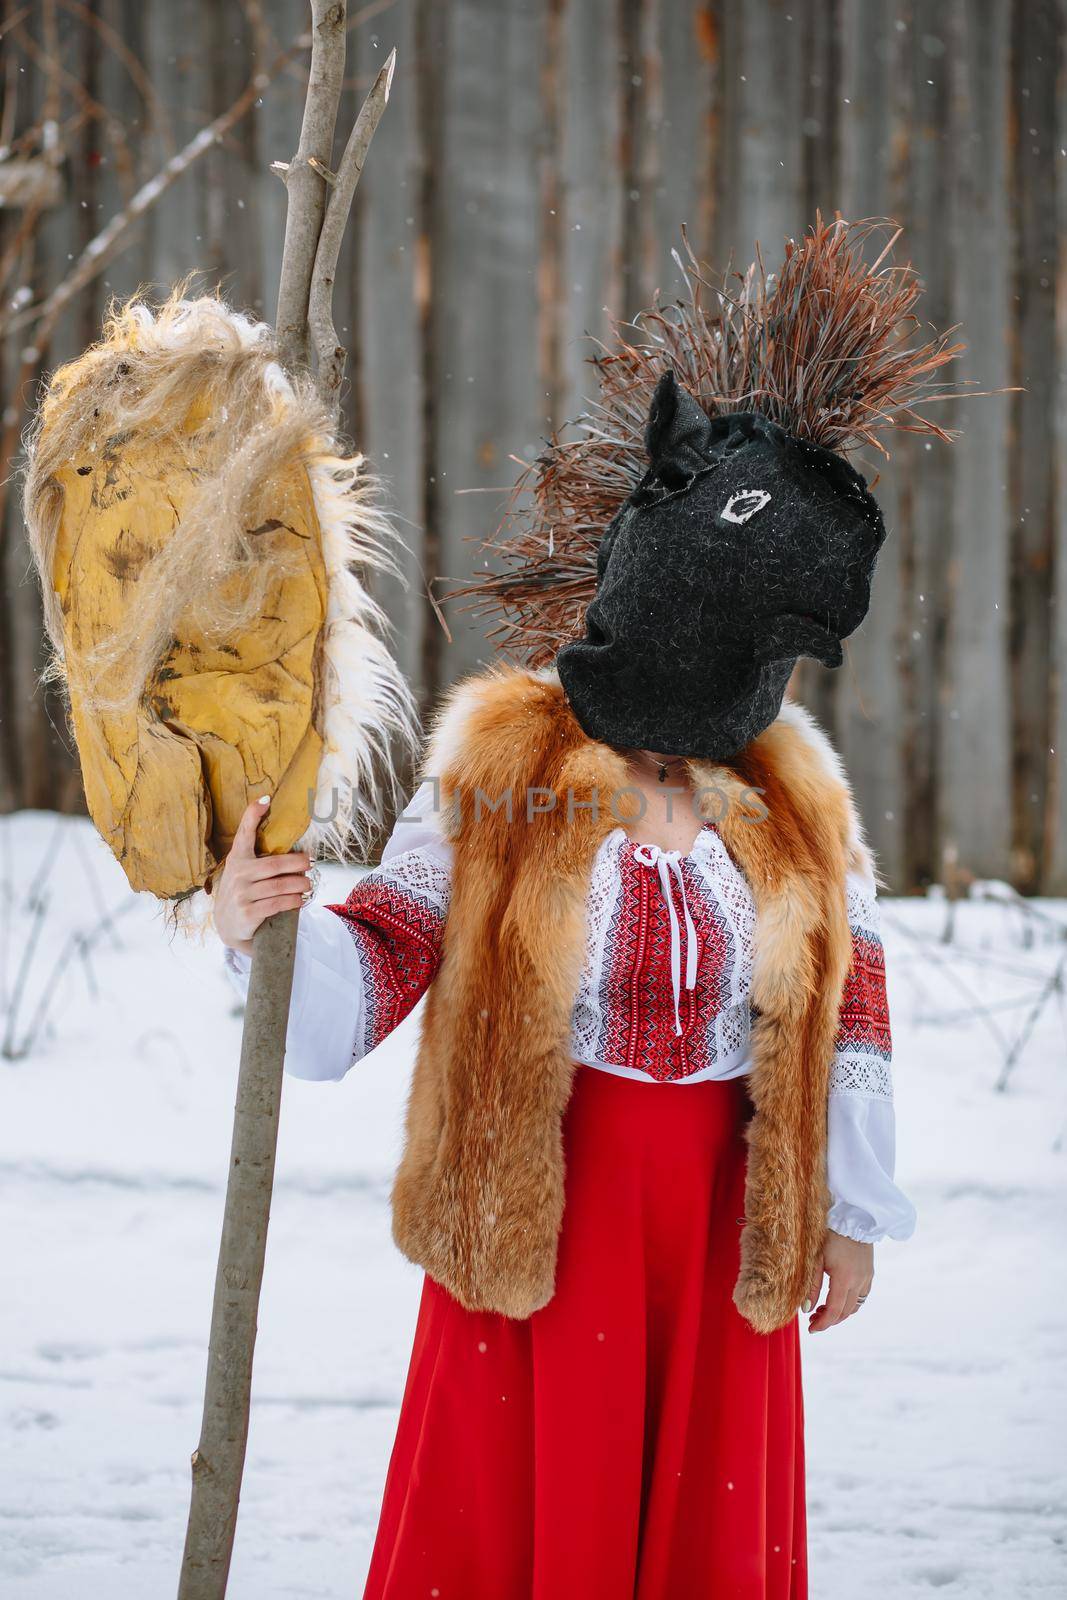 A man in a national costume with the head of an animal celebrates the arrival of the pagan holiday Maslenitsa. An ancient pagan rite by deandy